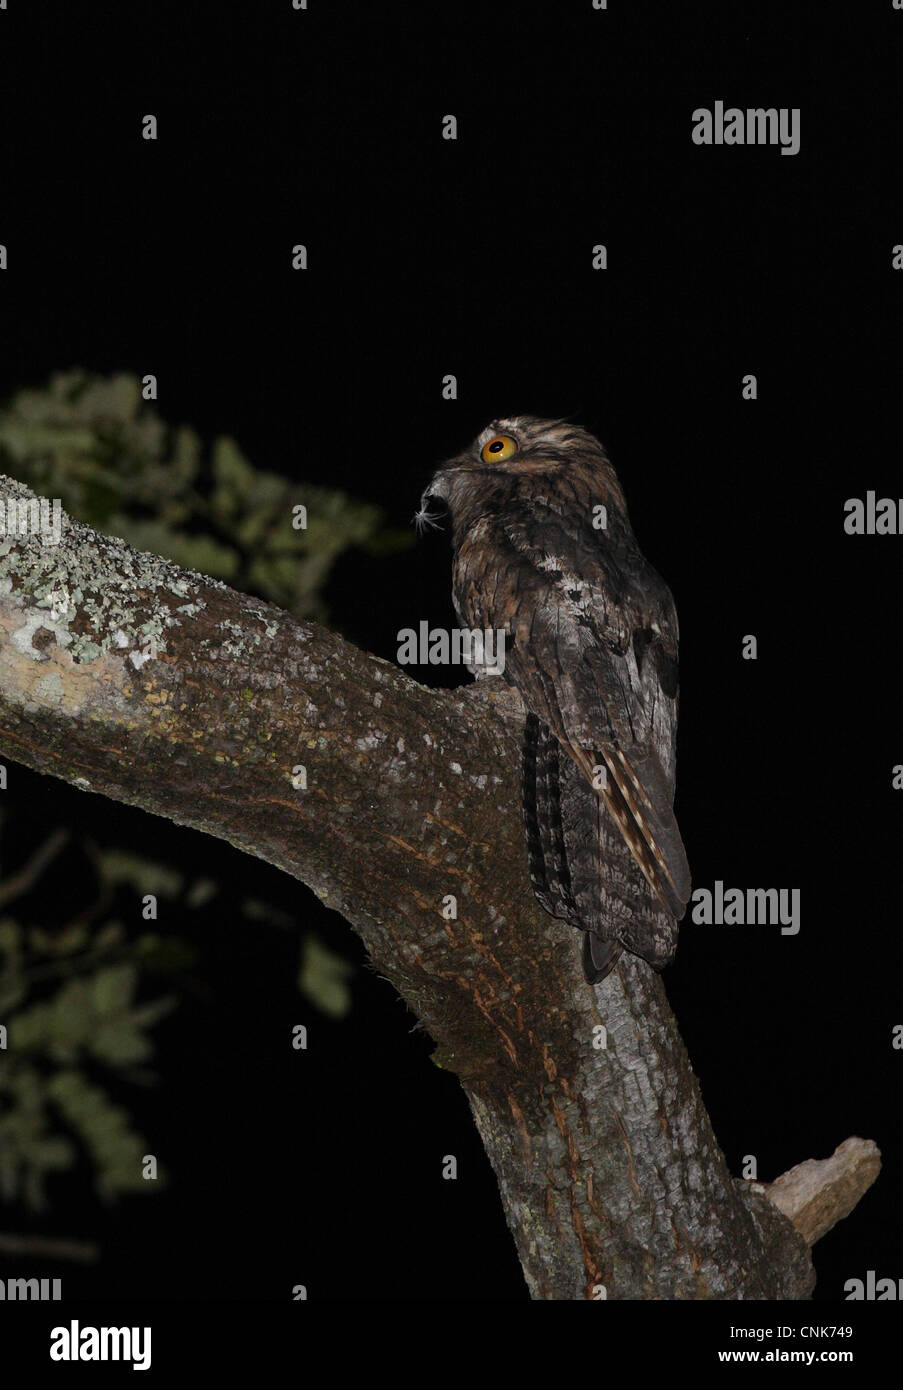 Northern Potoo Nyctibius jamaicensis adult feather in beak perched on branch at night Marshall's Pen Jamaica november Stock Photo